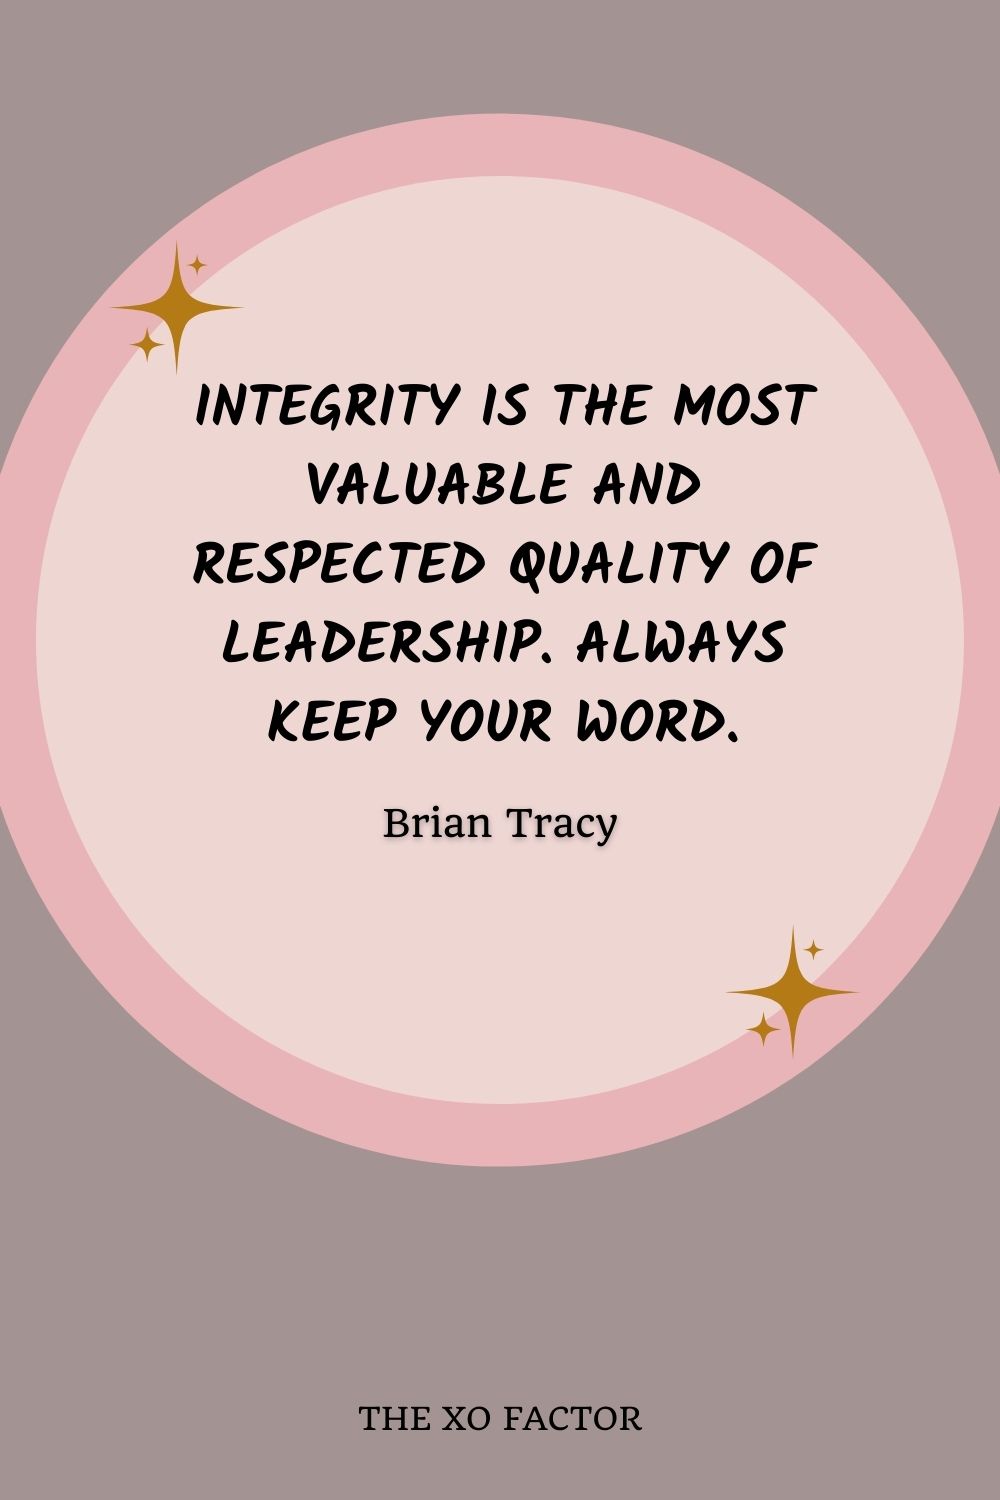 Integrity is the most valuable and respected quality of leadership. Always keep your word.” Brian Tracy